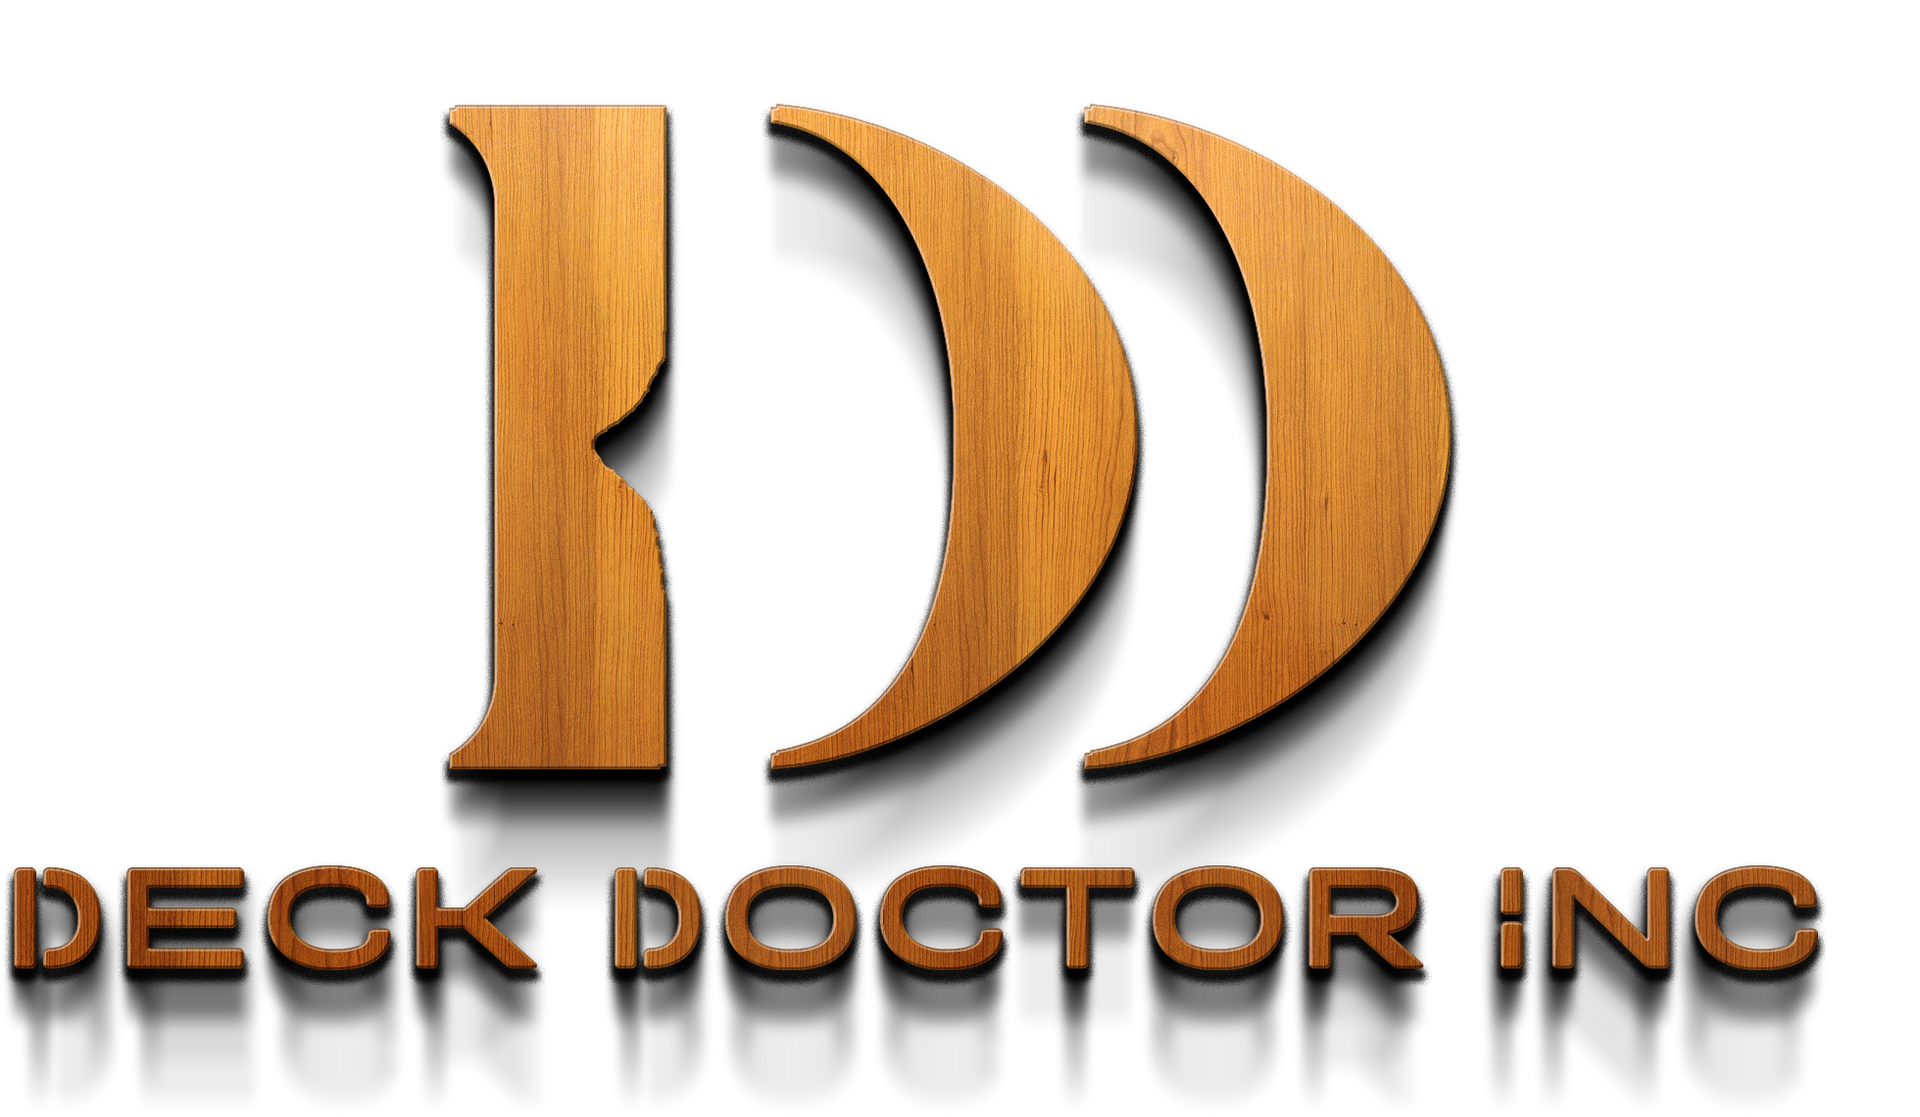 Deck Doctor Inc Logo. The logo is 3d with wood grain pattern on the letters.